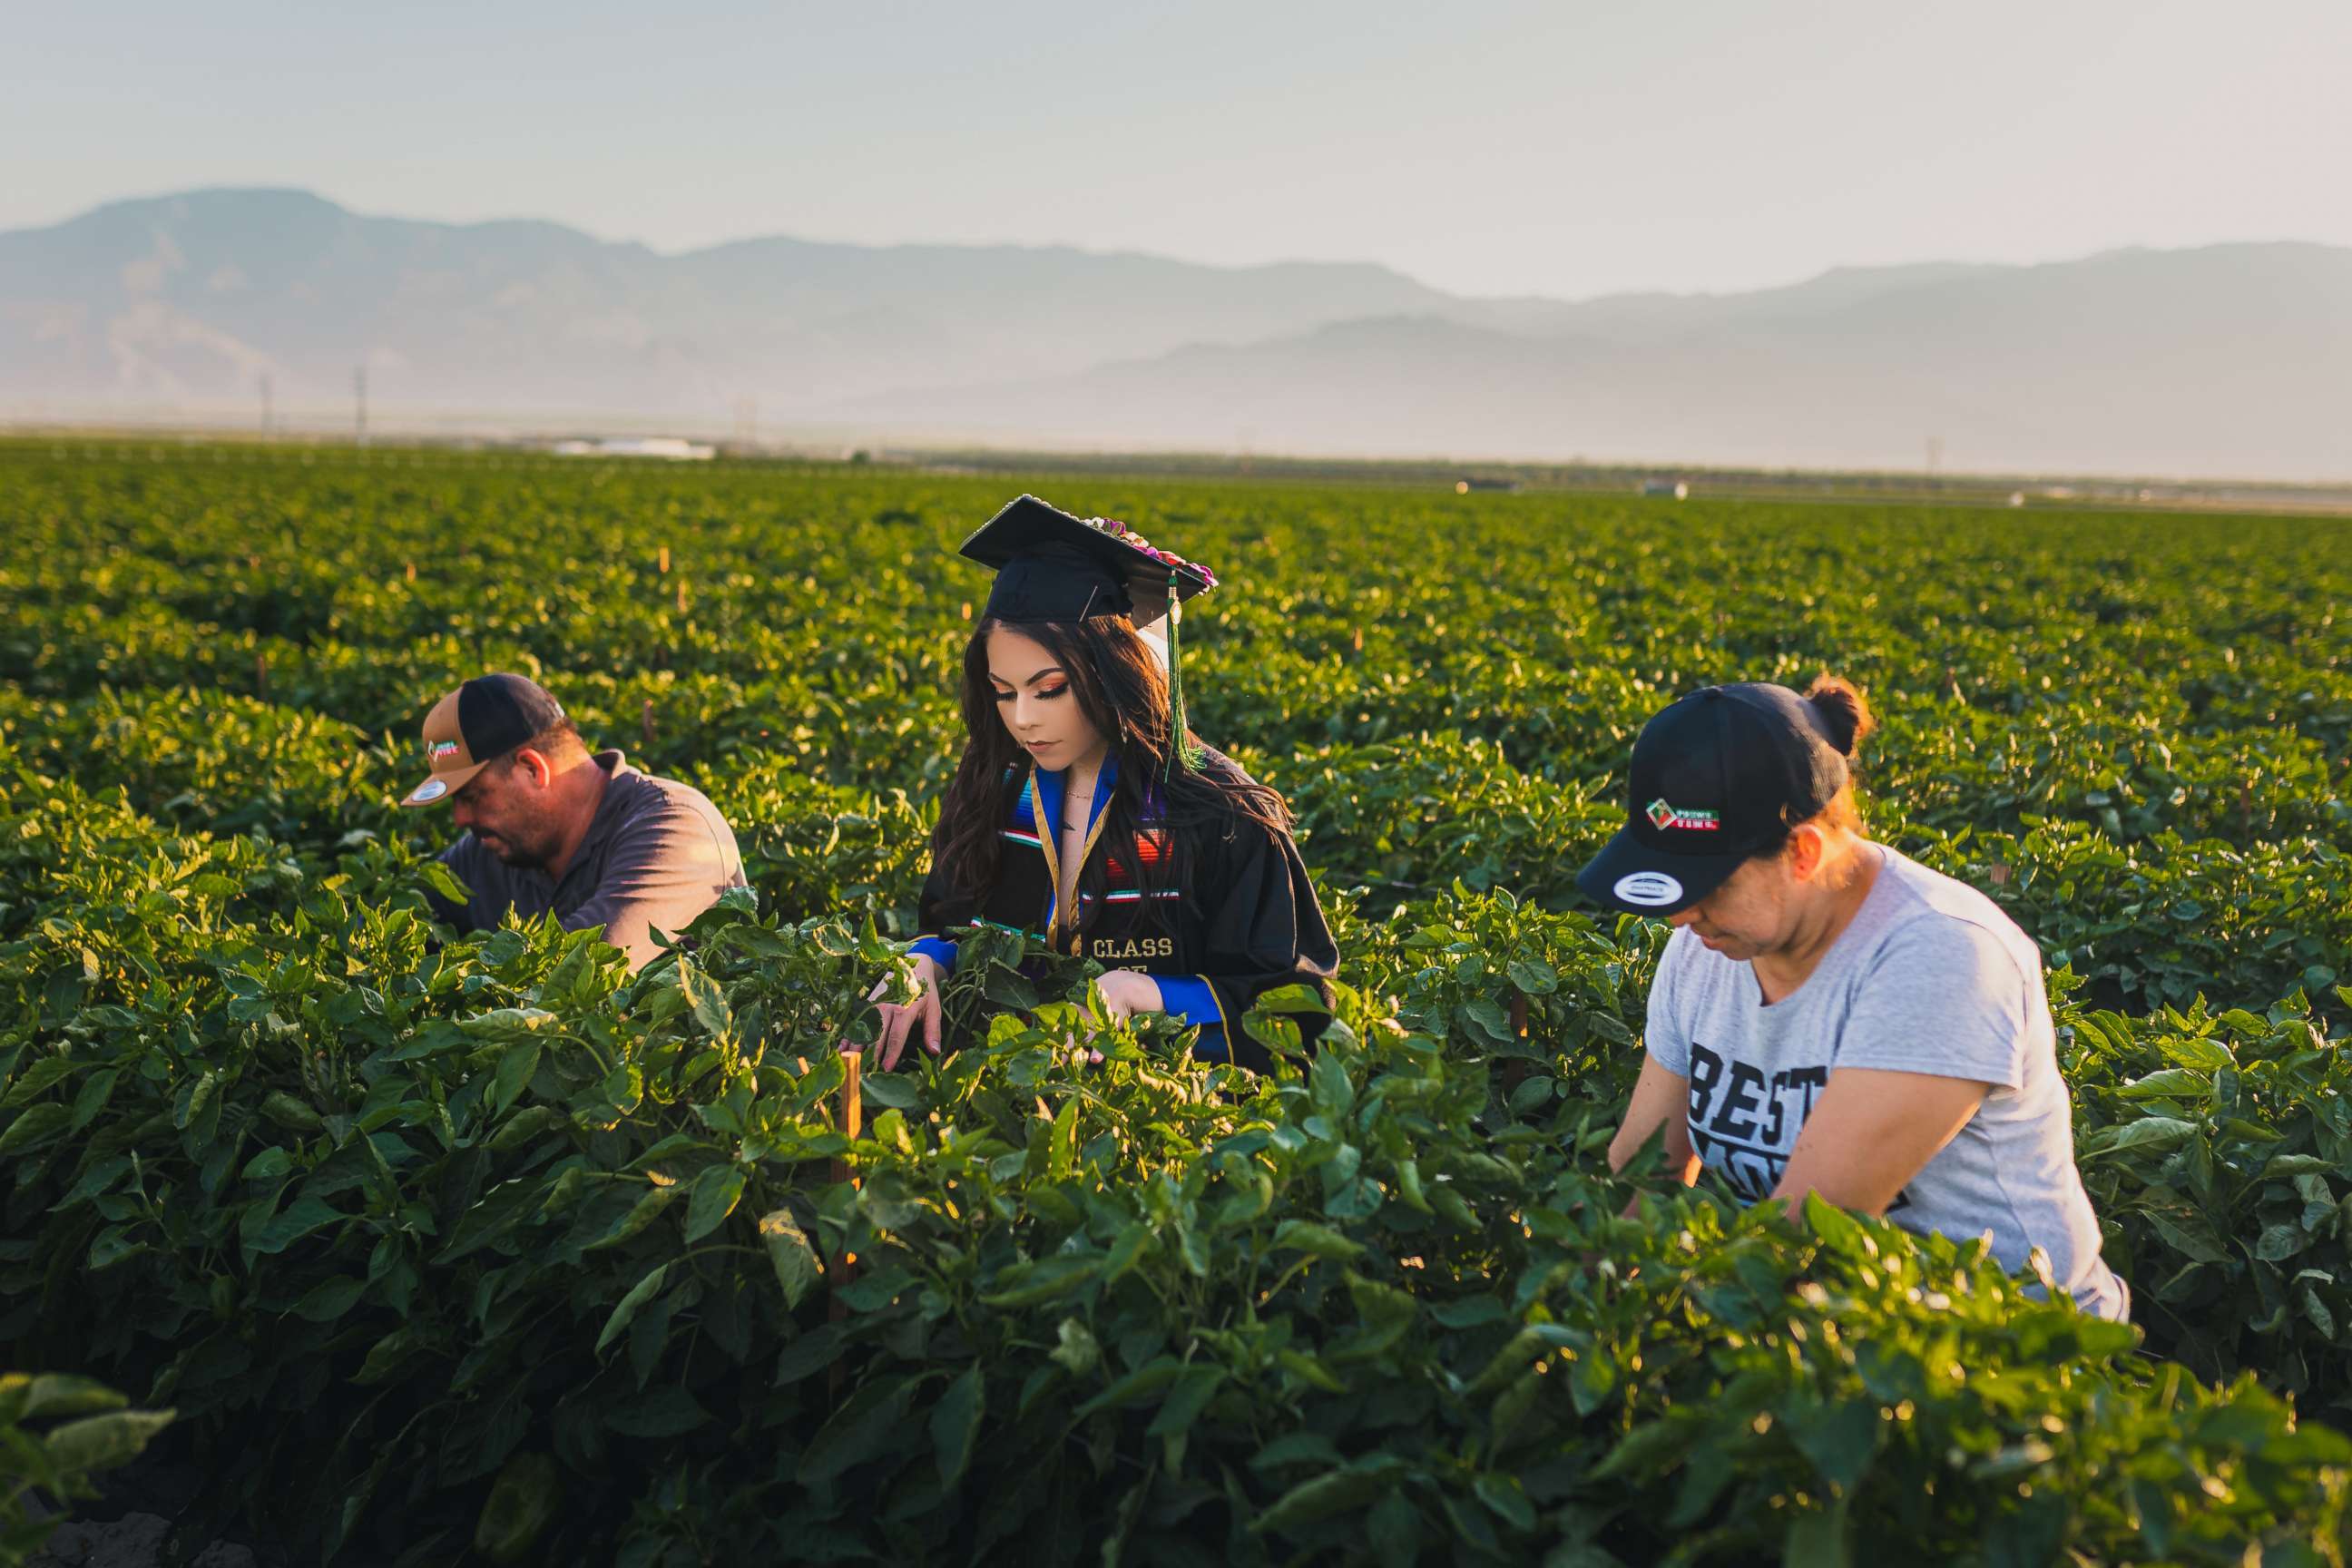 PHOTO: Jennifer Rocha, 21, a new graduate from the University of California San Diego, poses for a graduation photo with her parents in the fields where they worked to support her education.